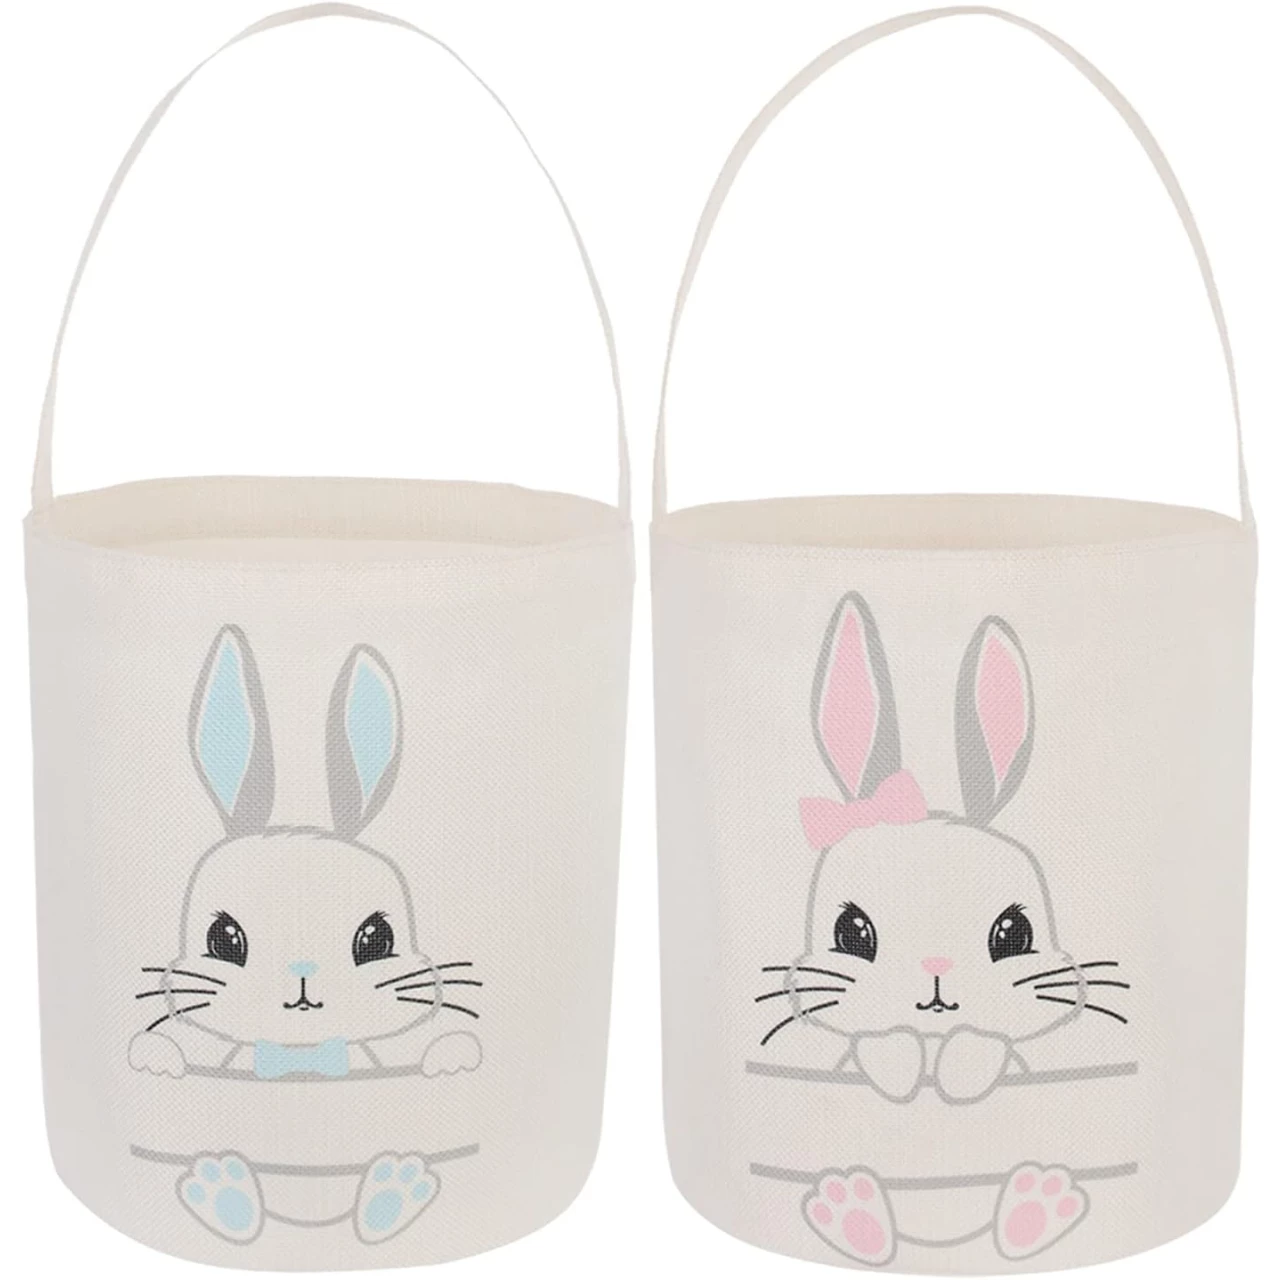 Easter Bunny Basket Egg Bags for Kids,Canvas Tote Bags Buckets for Easter Eggs Personalized Candy Egg Basket with Rabbit Print Easter Tote Bag Party Candy Storage Decoration（2pcs）